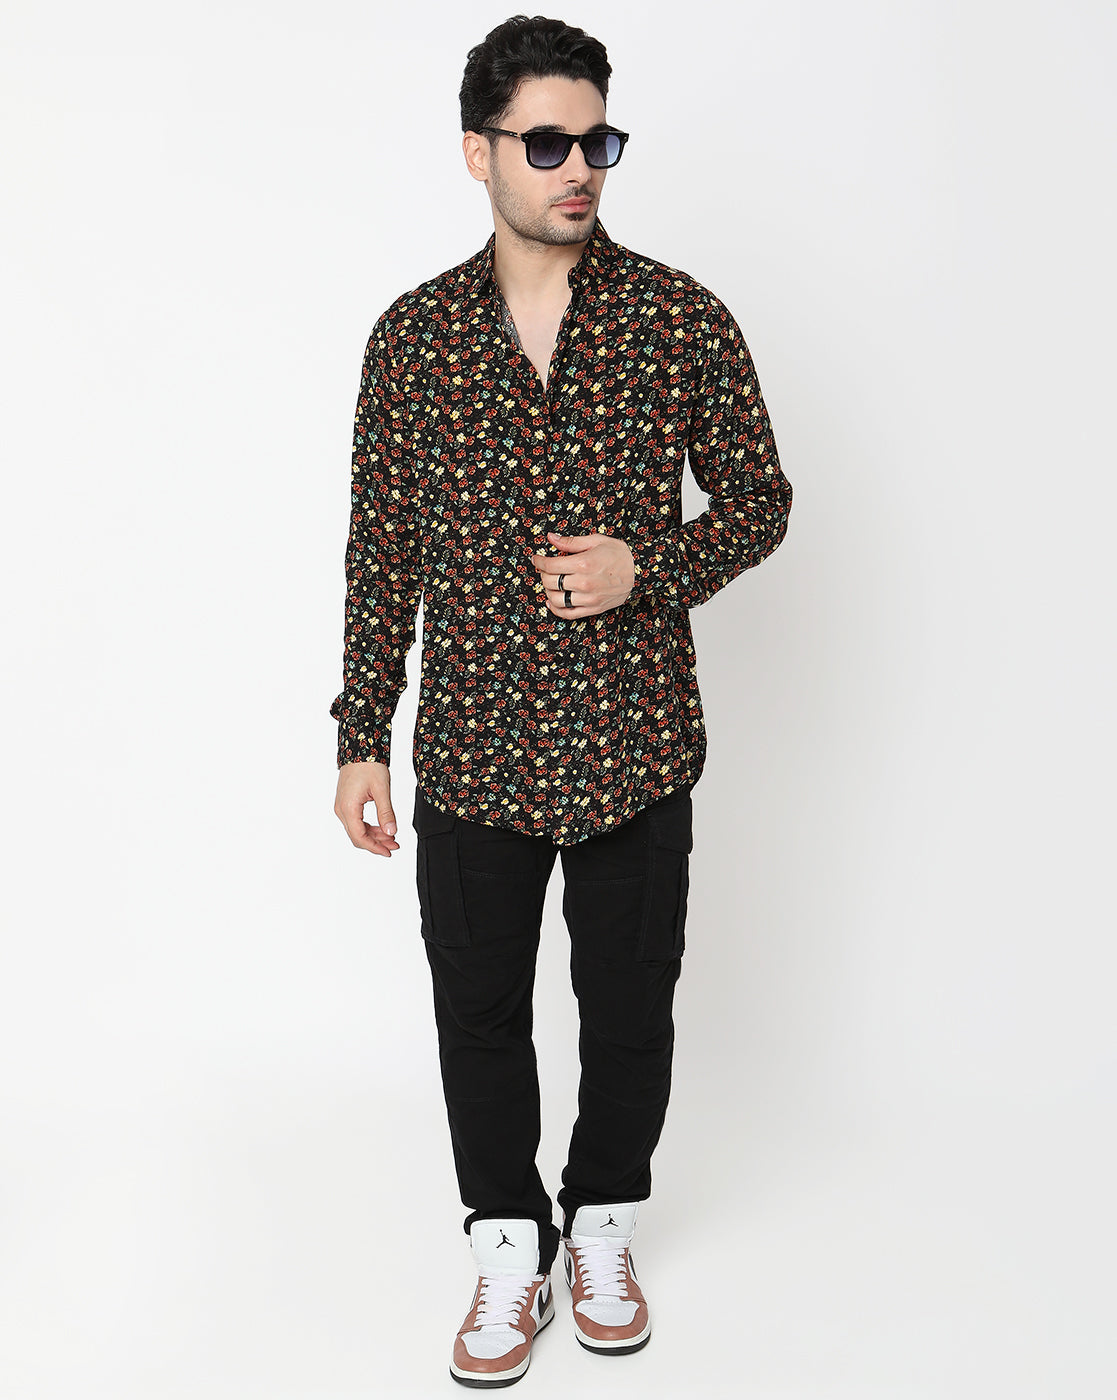 Black Based Multicolored Floral Printed Full Sleeve Rayon Shirt